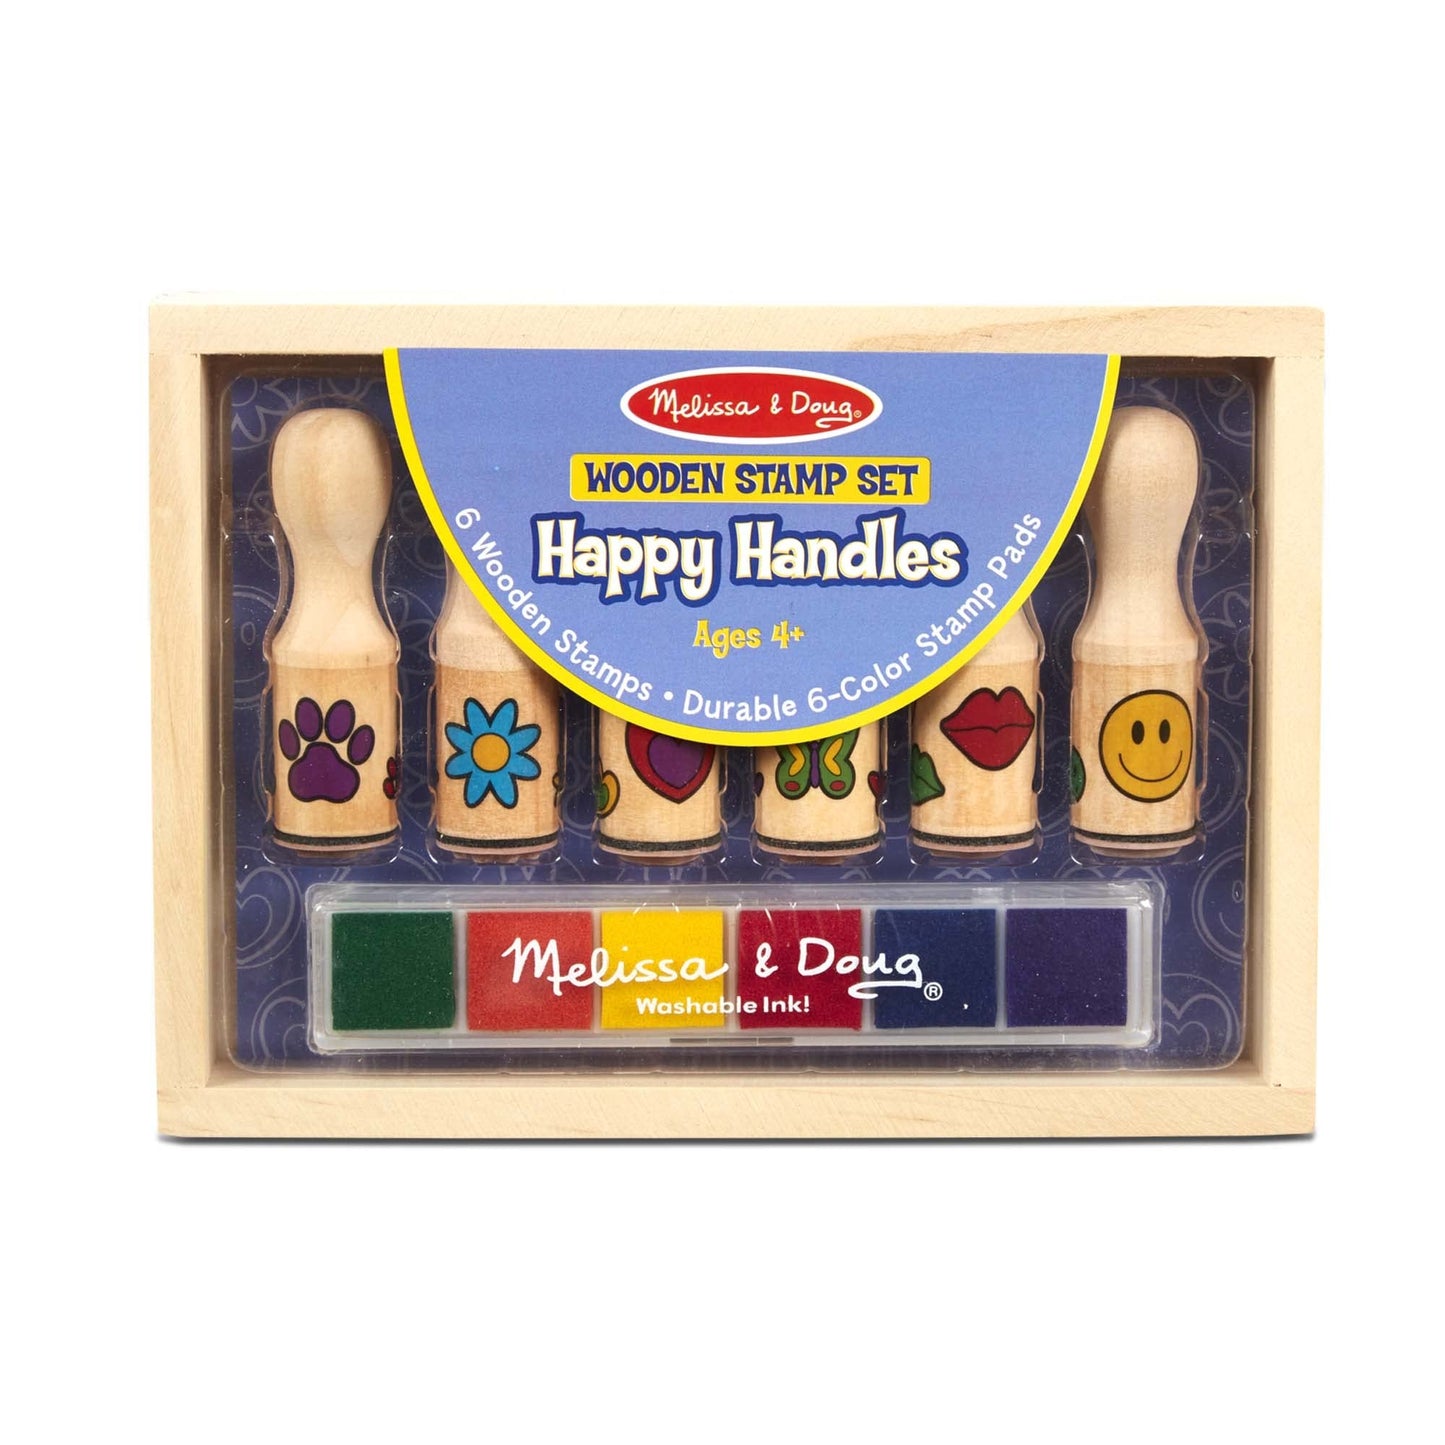 Melissa & Doug Happy Handles Wooden Stamp Set: 6 Stamps and 6-Color Stamp Pad - Kids Stamp Packs With Washable Ink, Easy To Hold Stampers For Kids Ages 4+